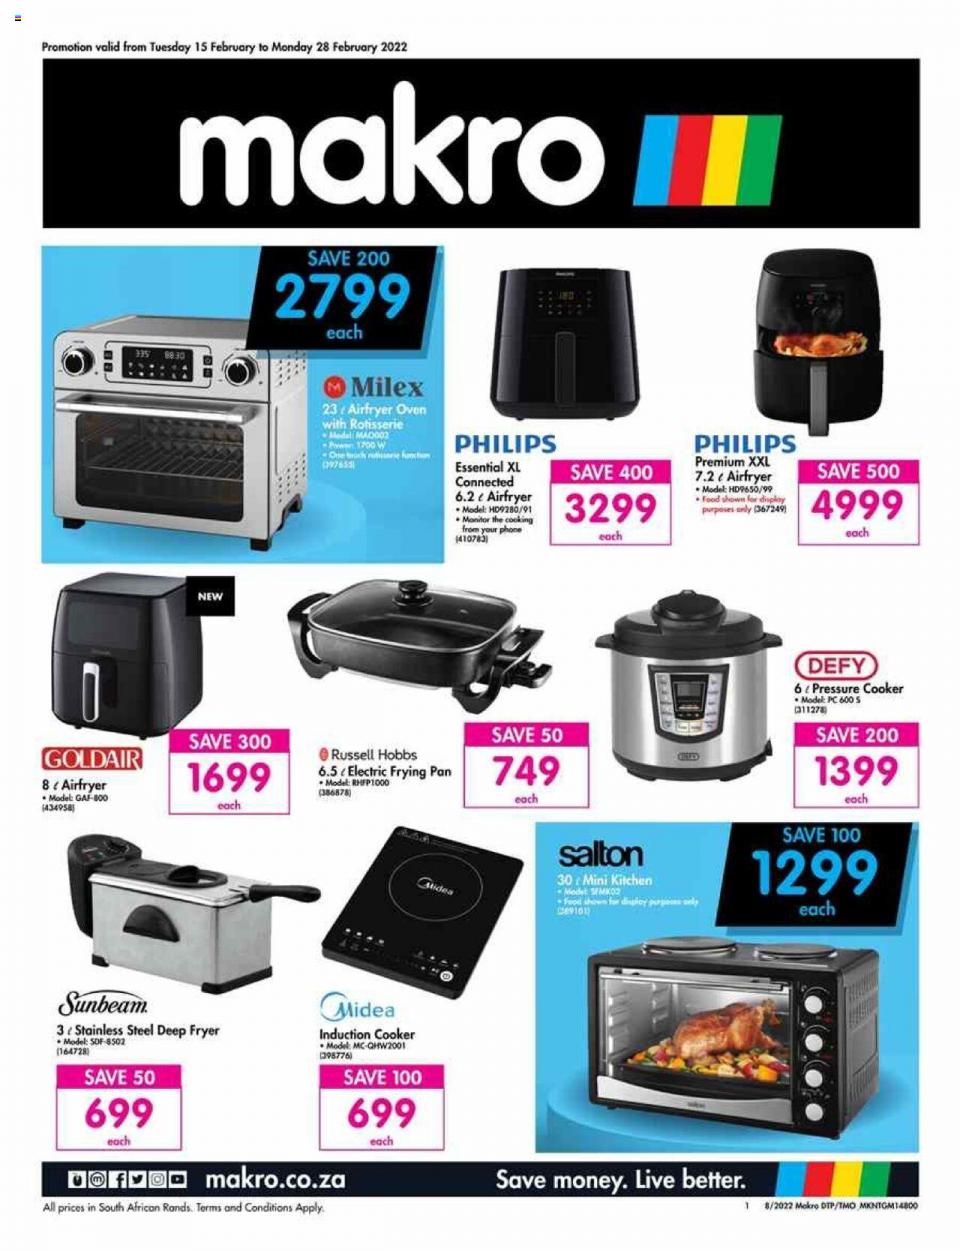 Makro Specials Cooking 15 – 28 February 2022